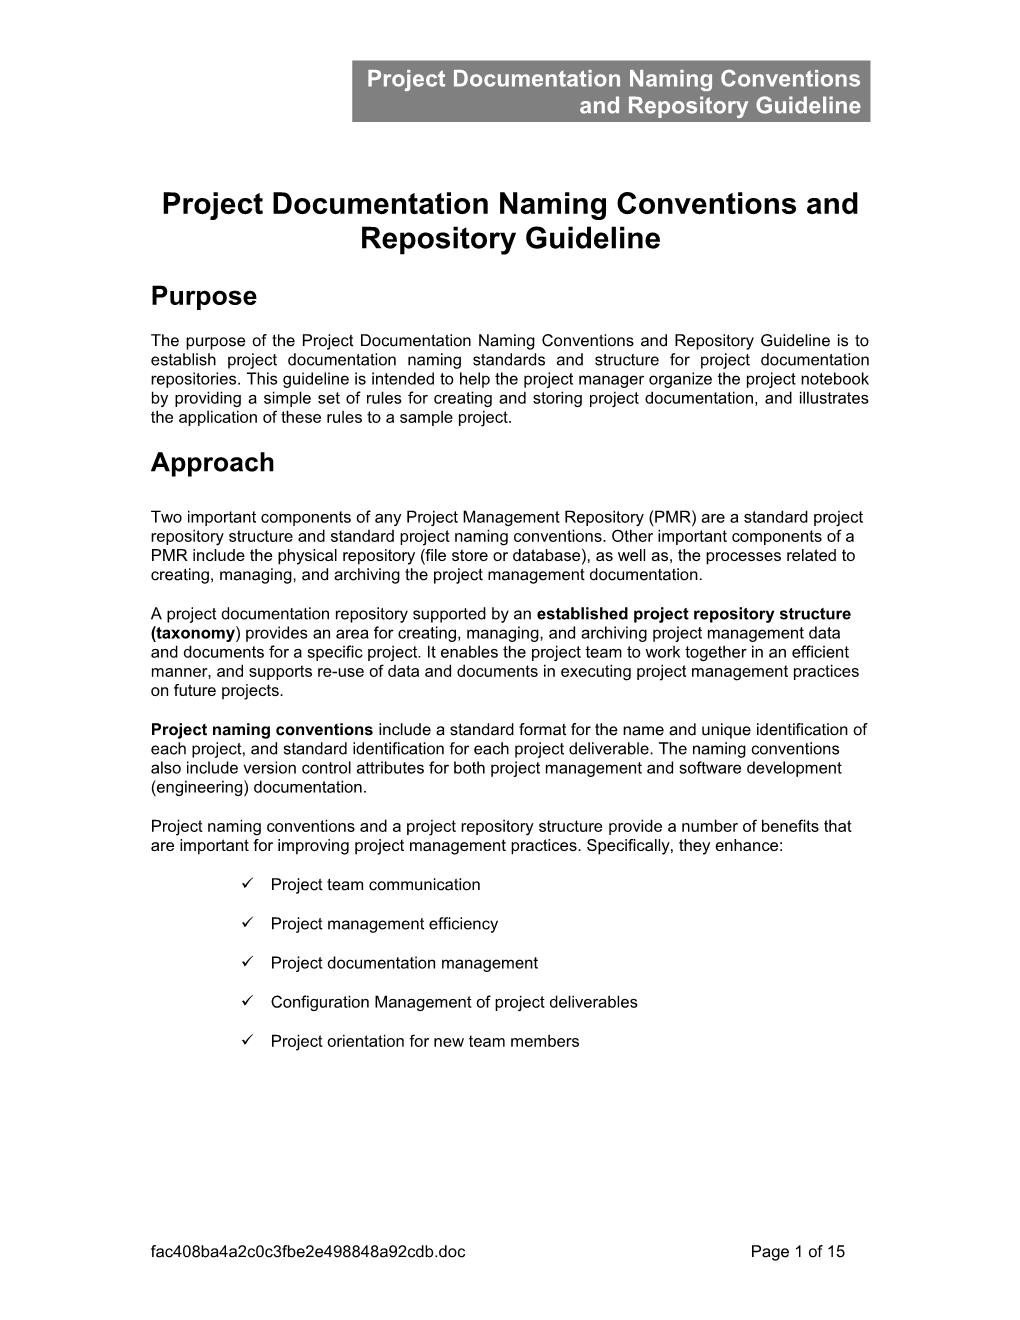 Project Documentation Naming Conventions and Repository Guideline